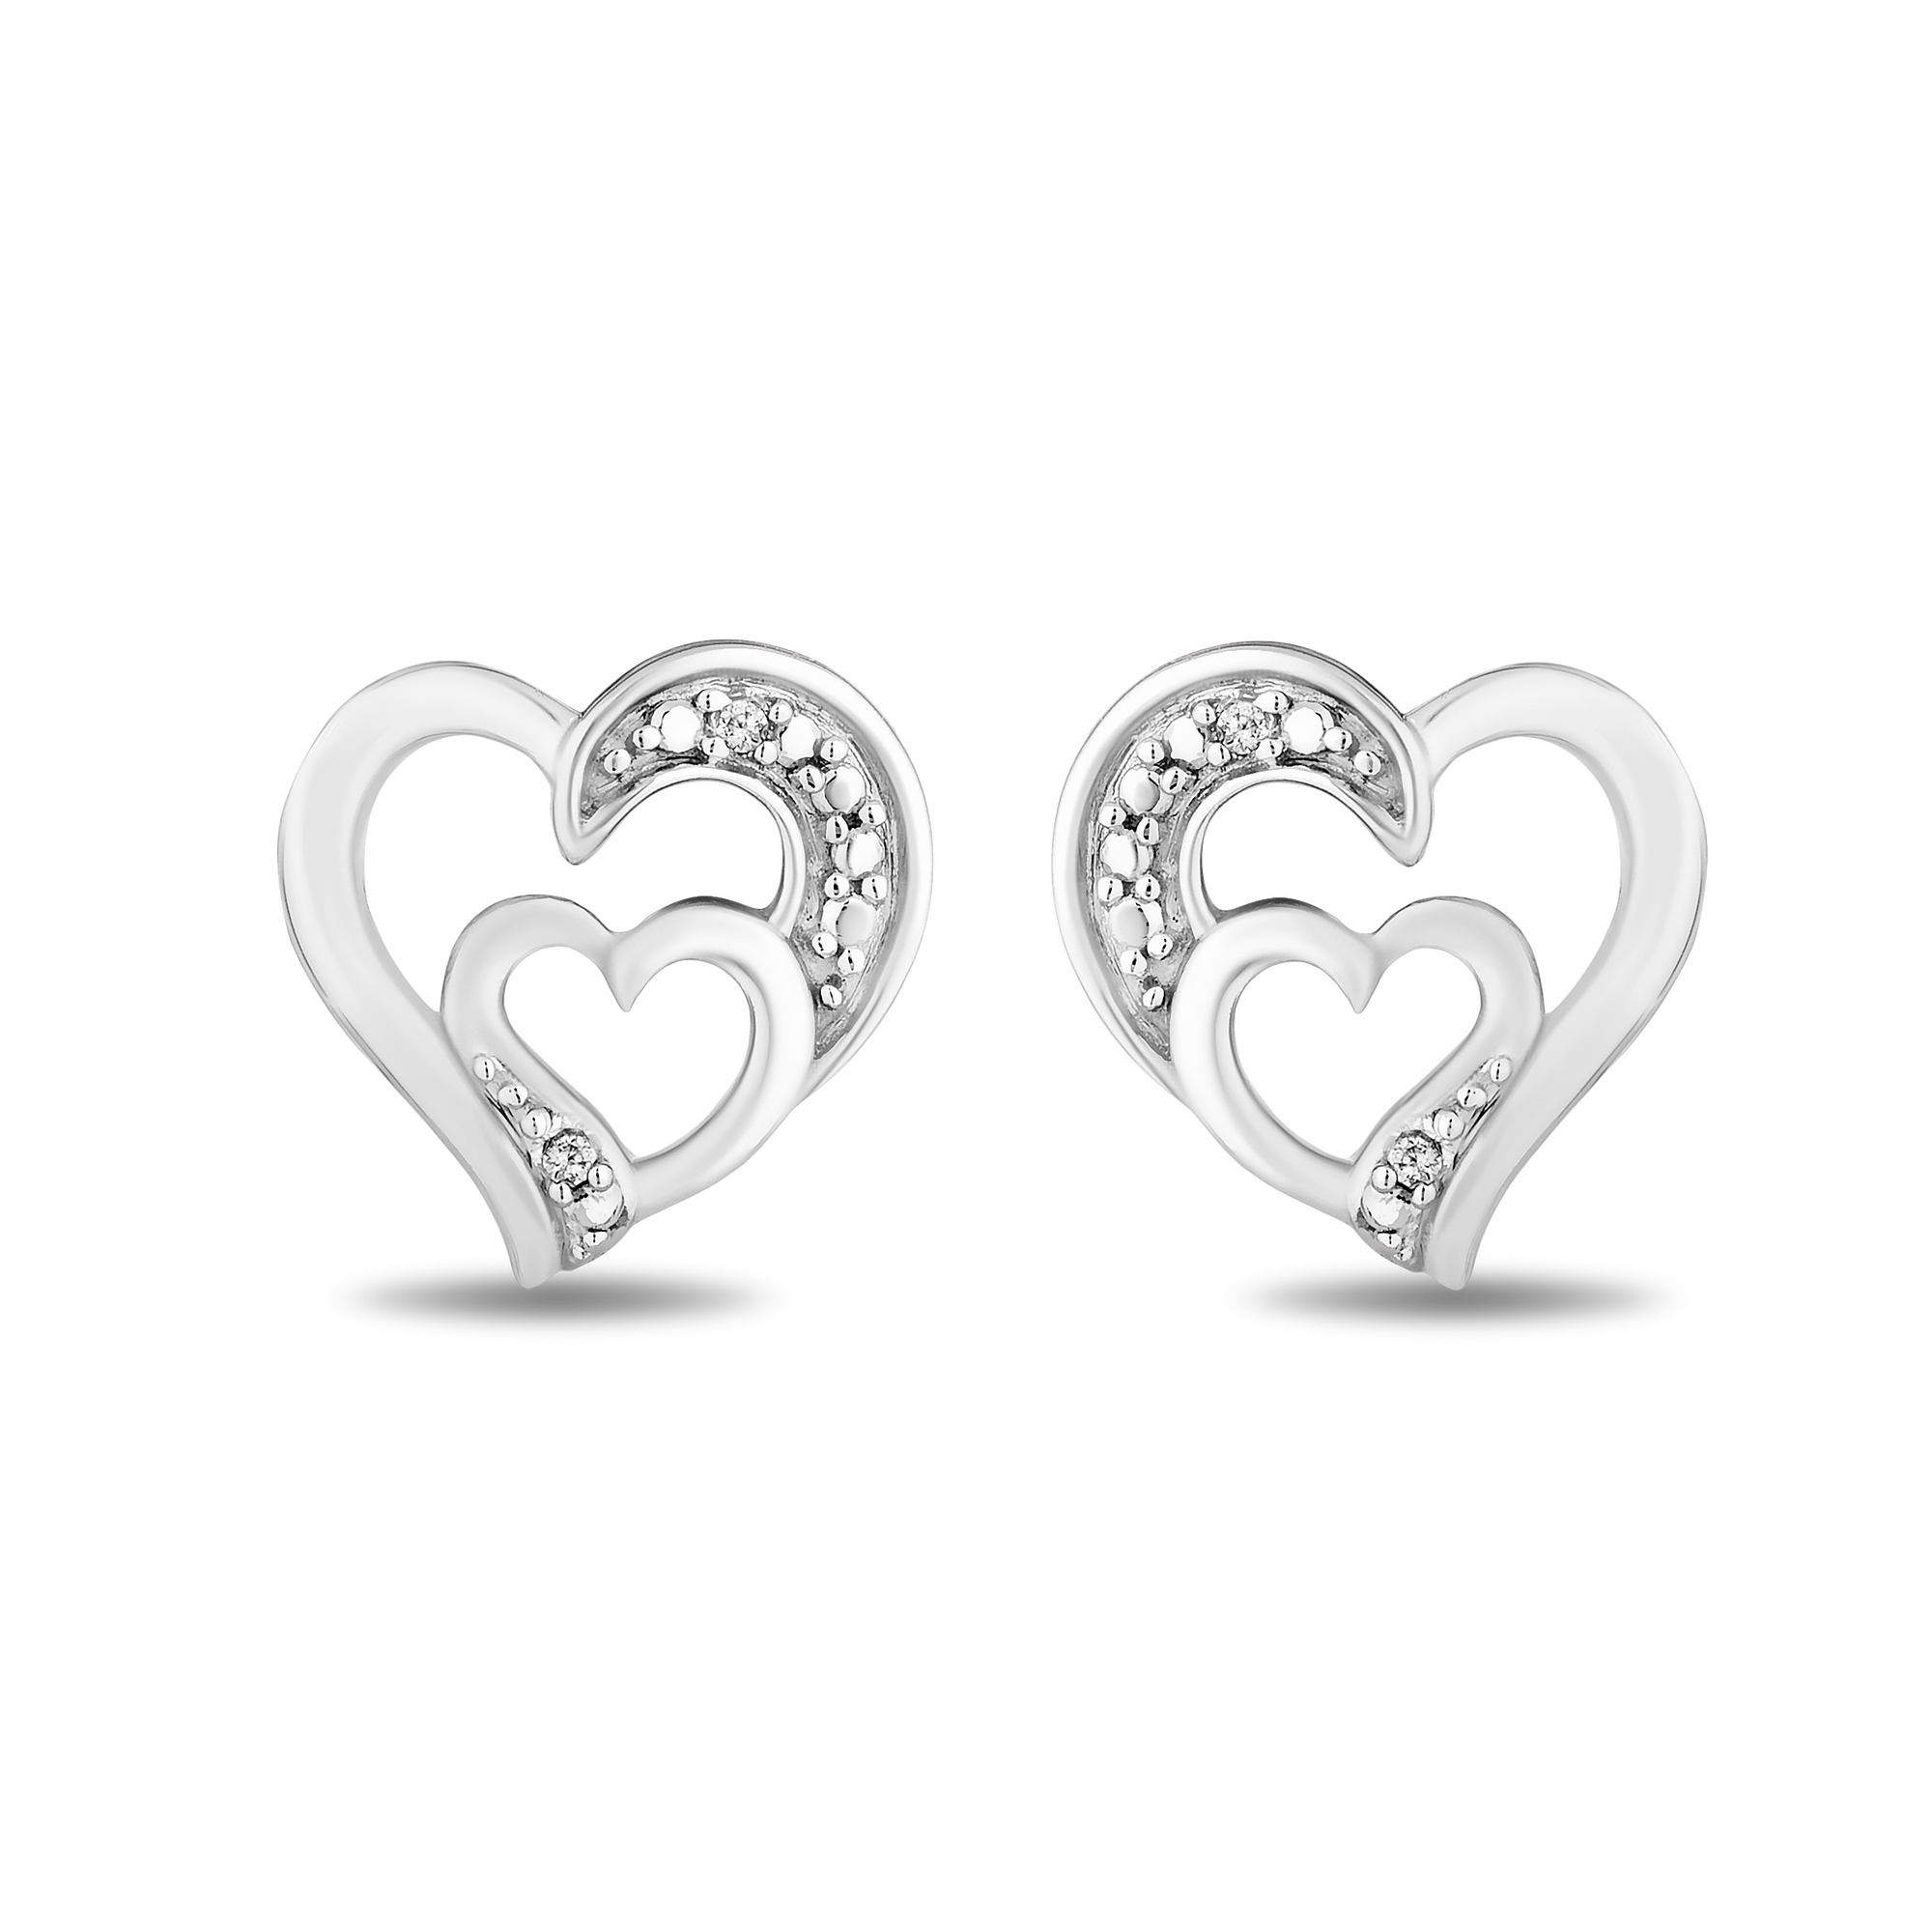 Heart Shaped Silver Earrings with Colorful Man Made Stones– Antwerpen  Sterling